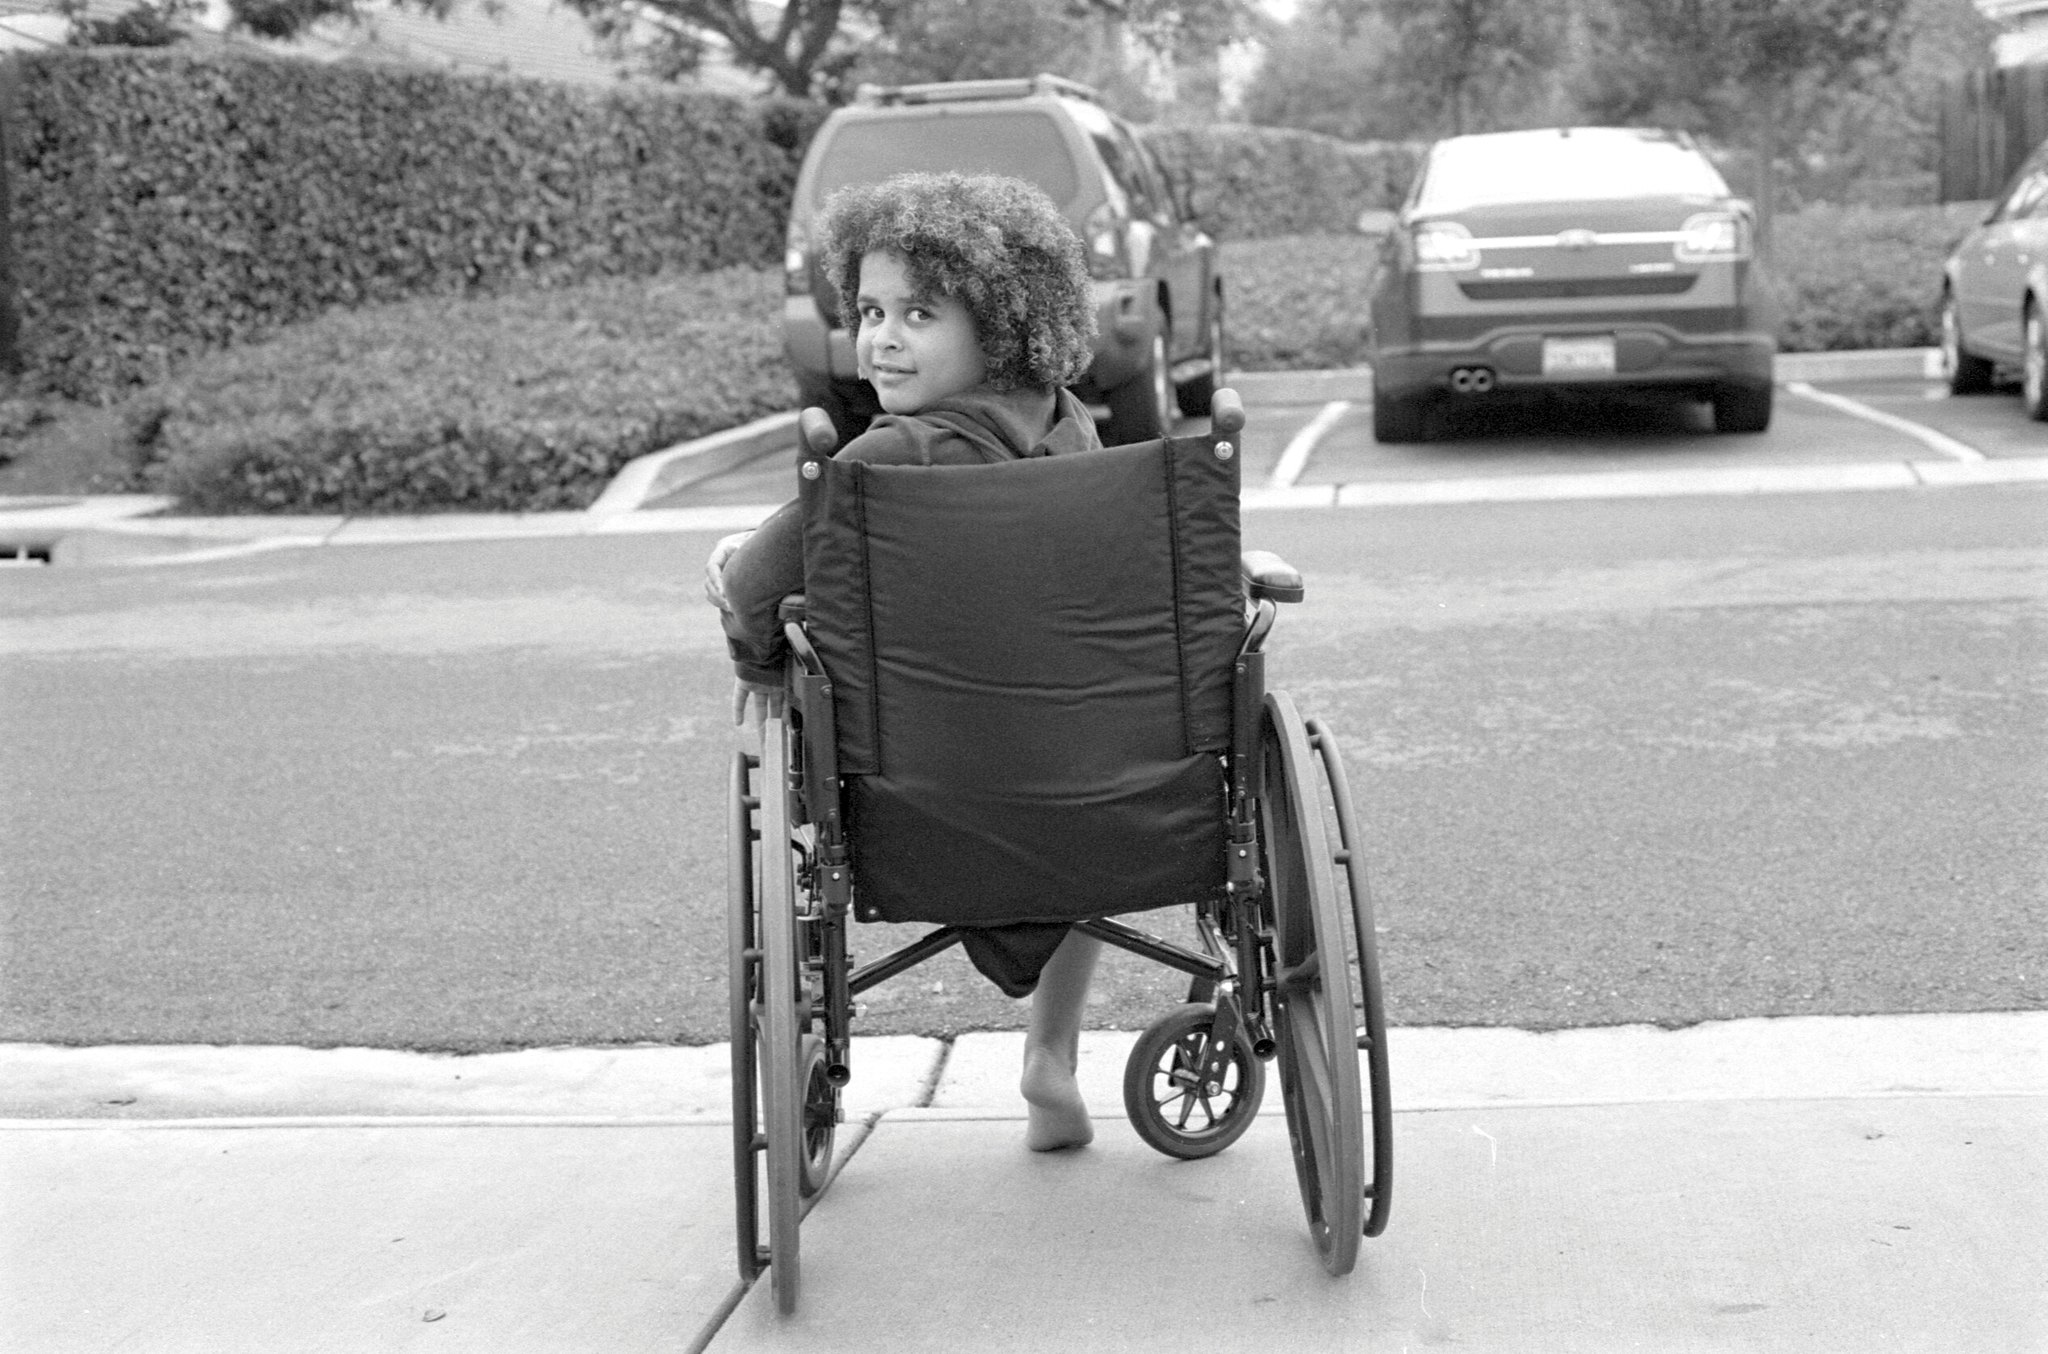 A child sits in a wheelchair, which is facing away from the camera. They are turning around and facing the camera. Image is in black and white.